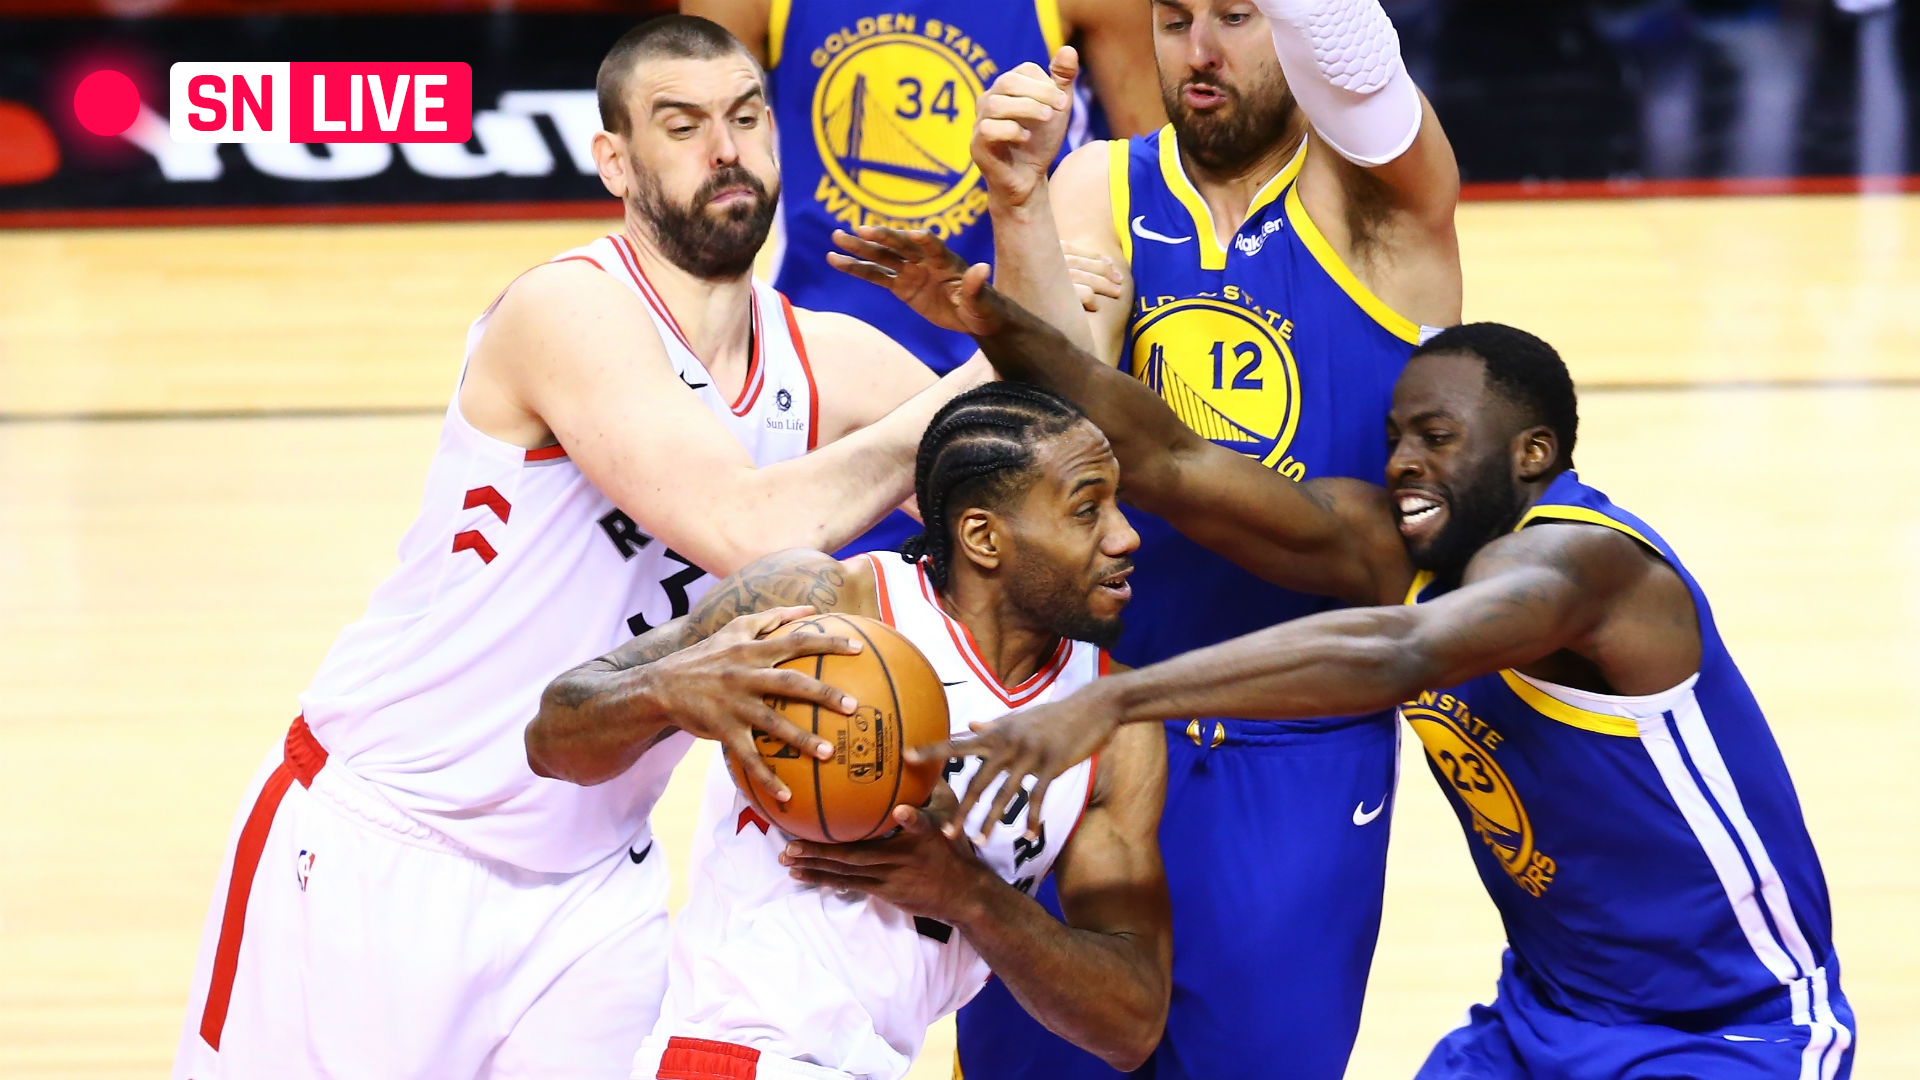 Raptors vs. Warriors Live score, highlights, updates from Game 3 of